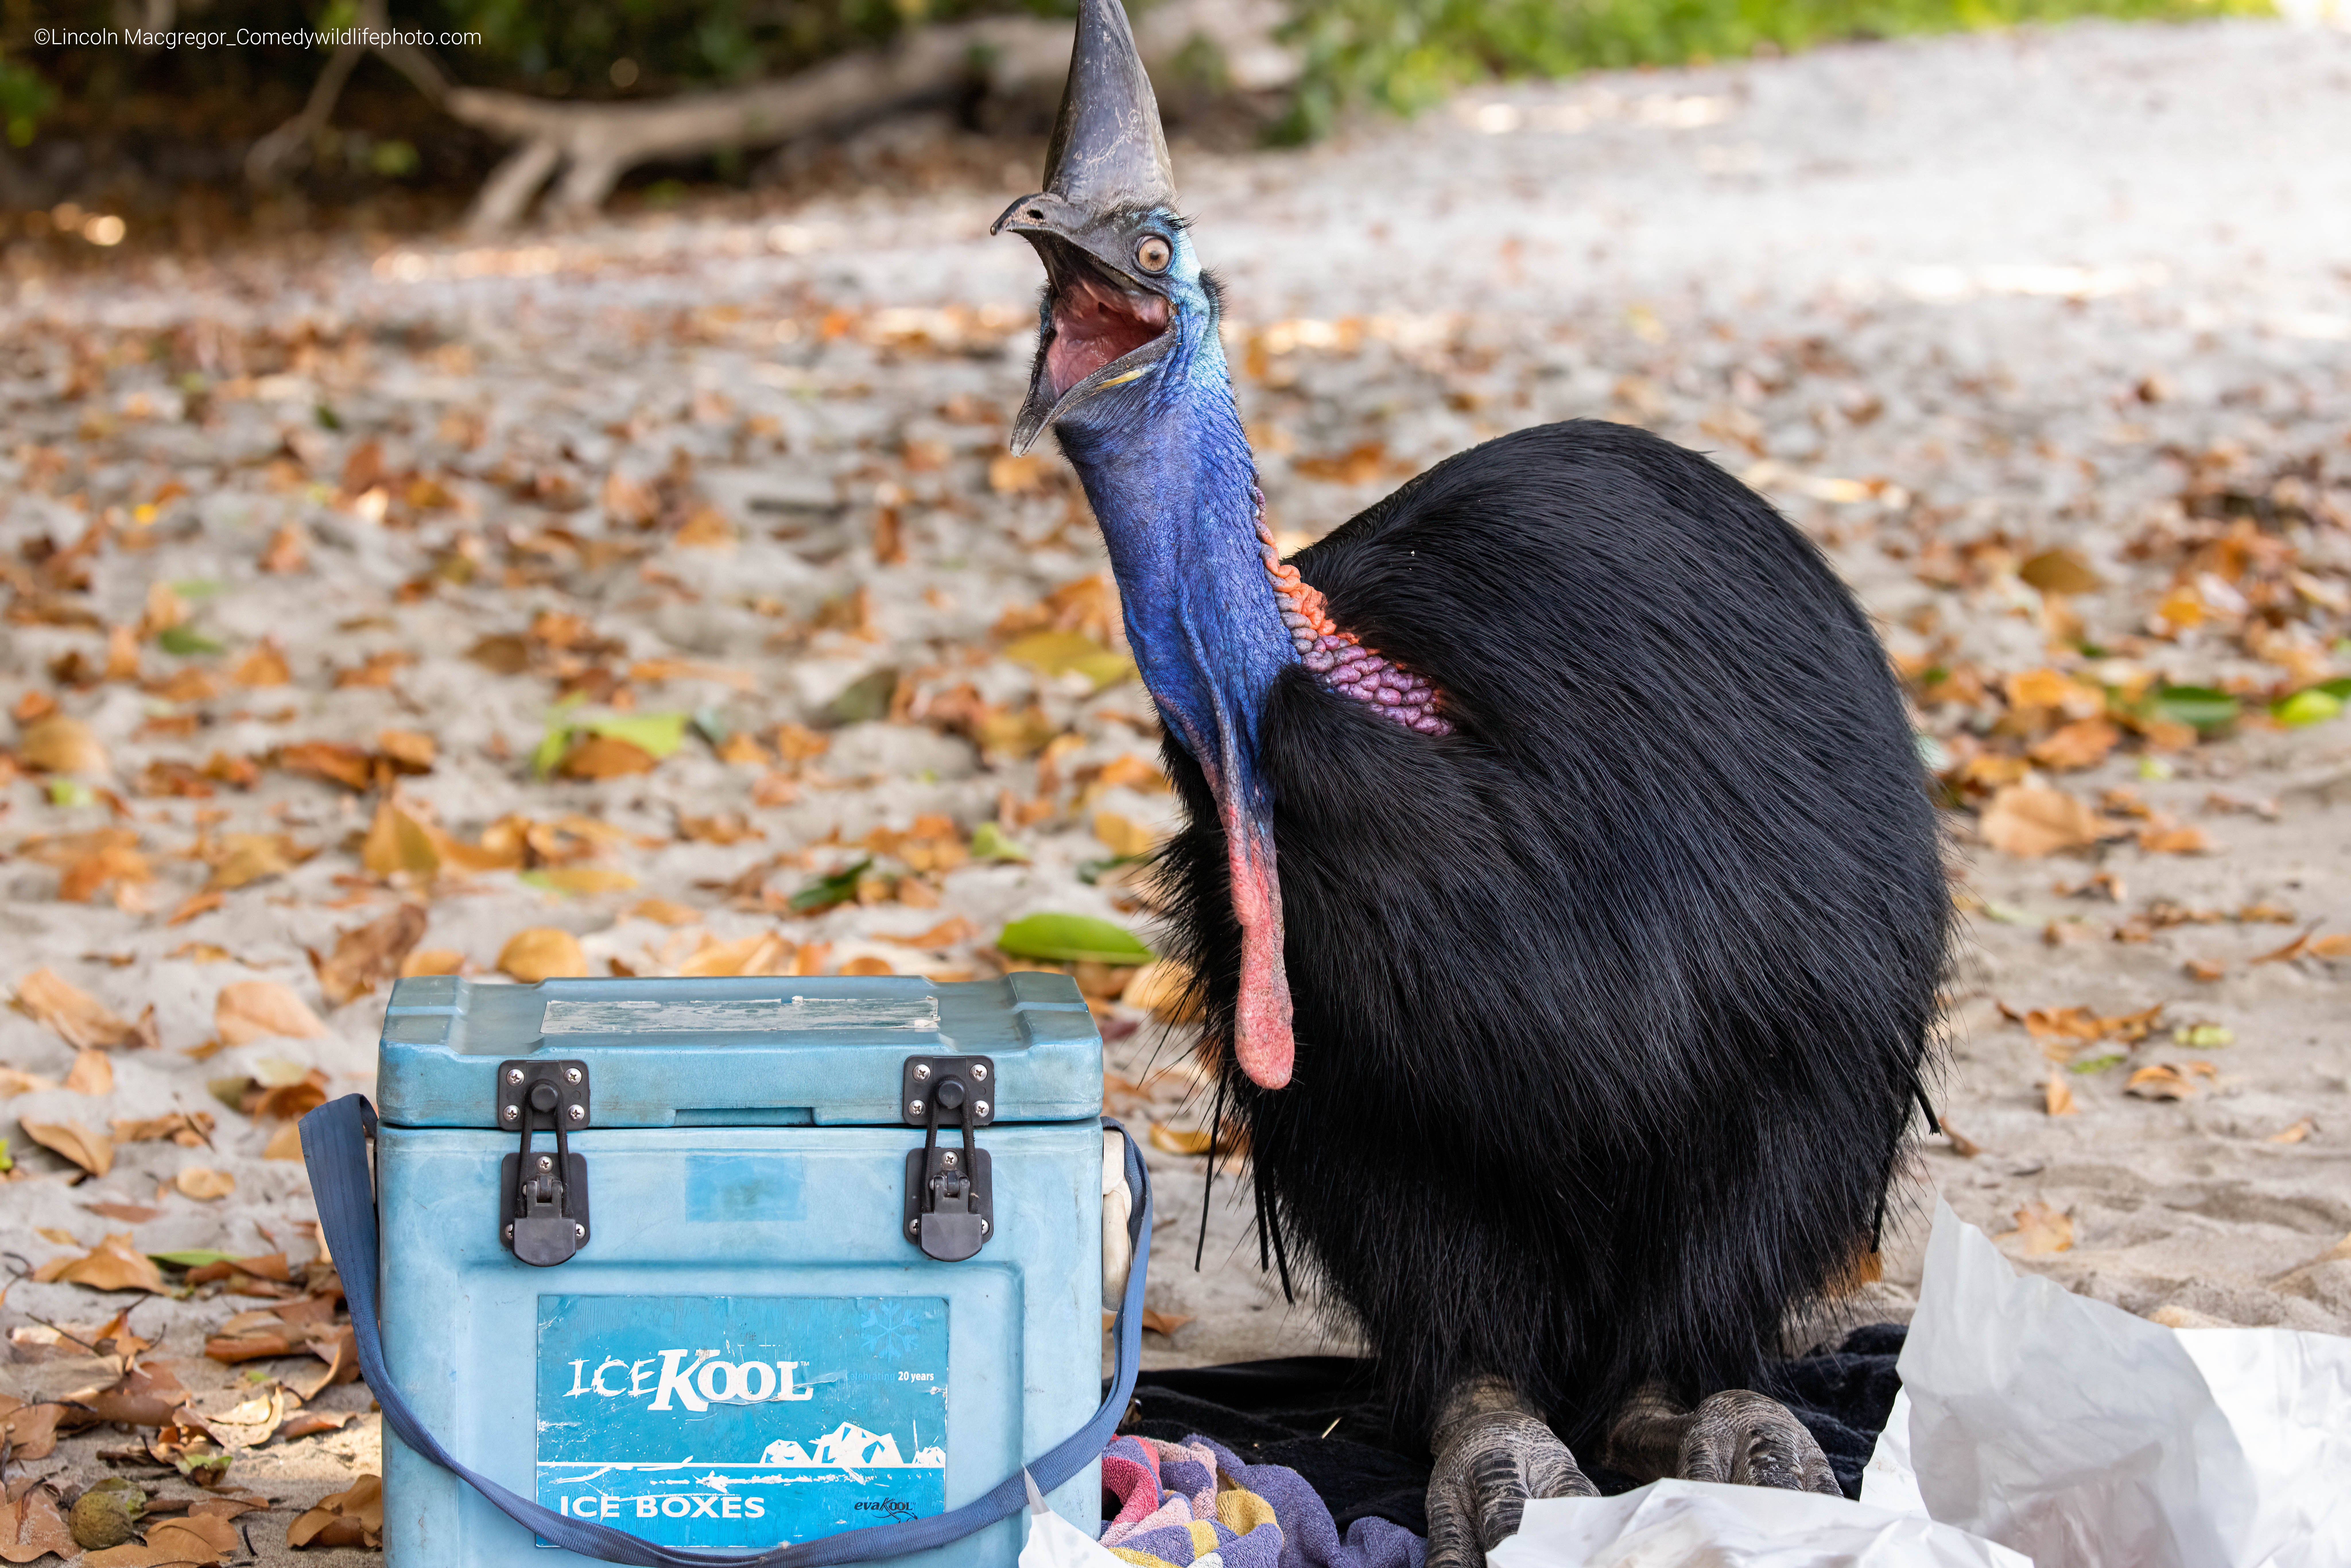 A cassowary gawks nexts to a cooler. (Photo: © Lincoln Macgregor / Comedywildlifephoto.com.)